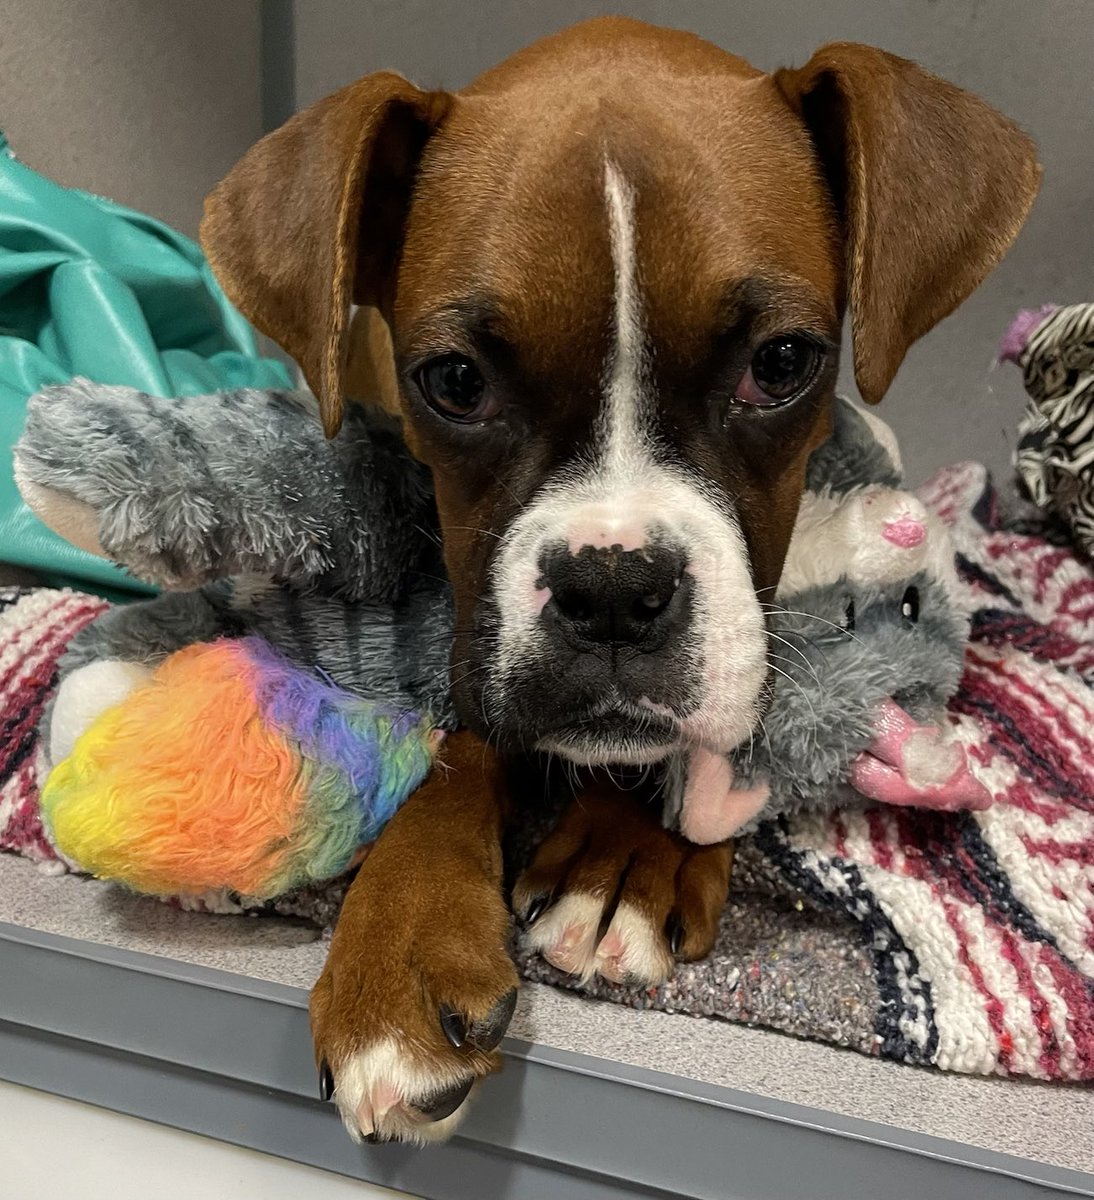 Phoebe is a fighter. This pup came into rescue with a mass on her spinal chord. Incontinent and smelling like a barn. She is still unable to control her 1&2.😓but the surgery allows her to walk. #saynotopuppymills #boycottamishmills #boxerpuppy #boxerdogs #adoptdontshop #adoptme